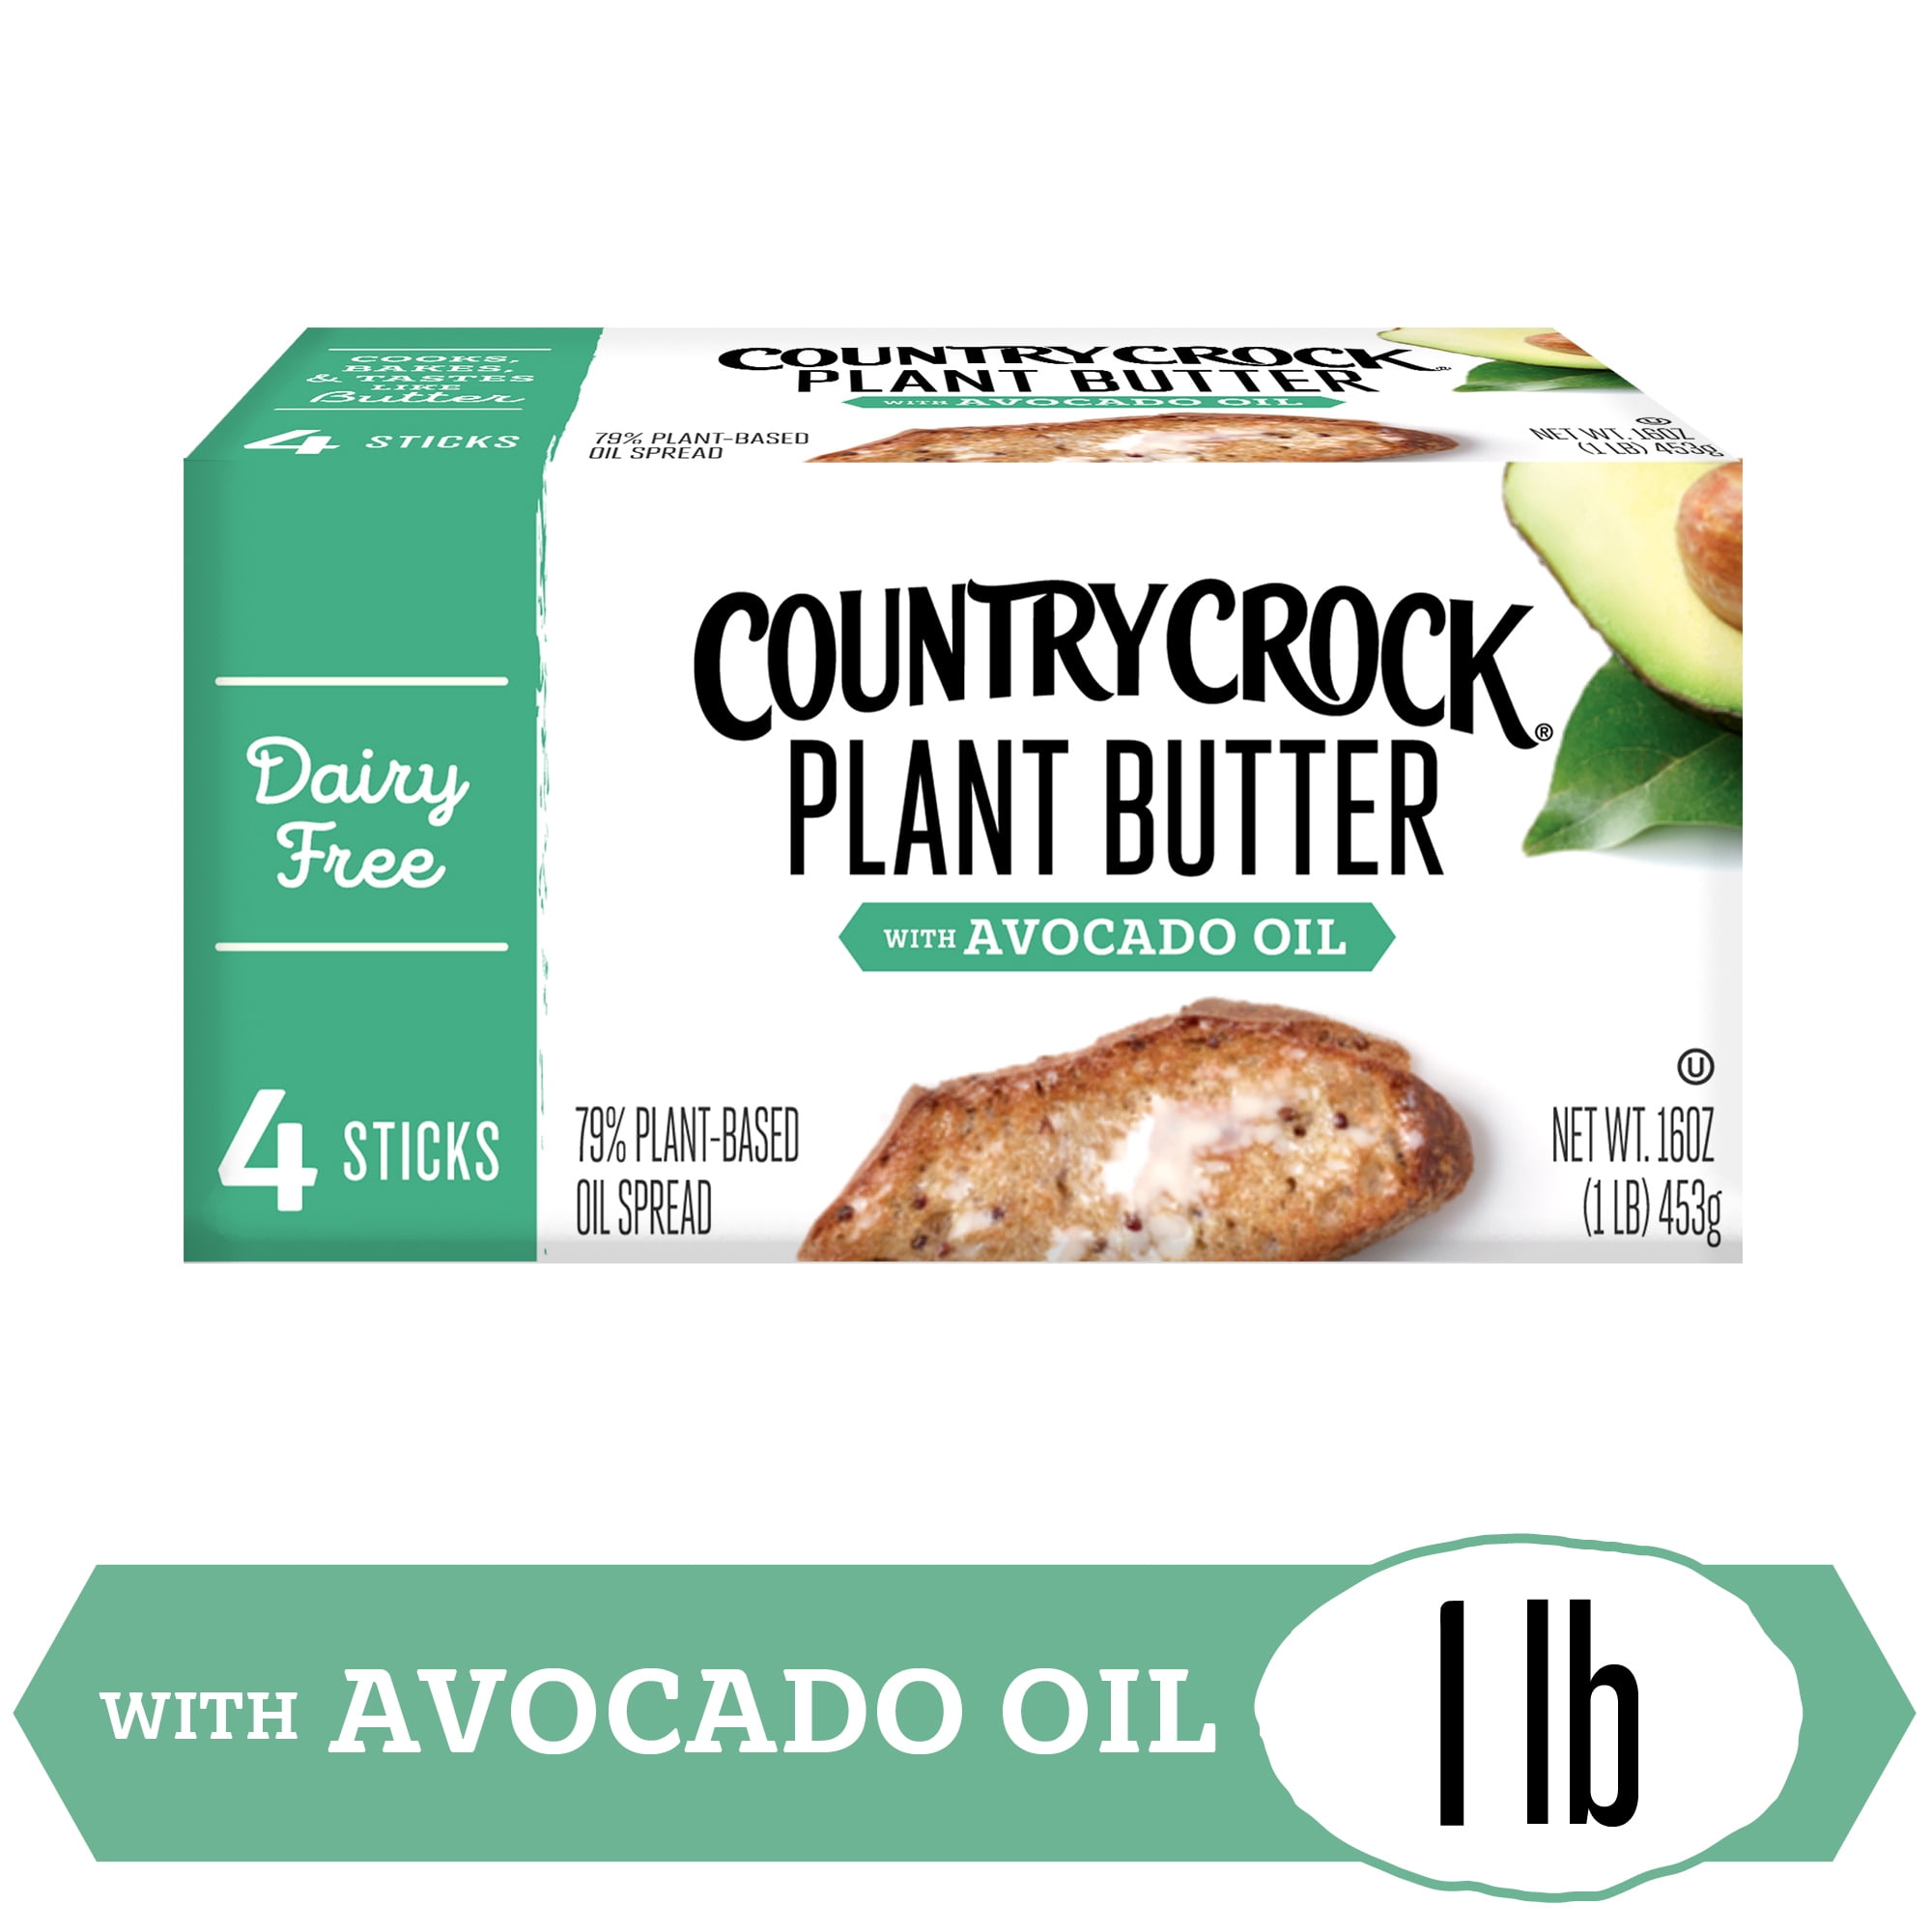 Country Crock Dairy Free Plant Butter with Avocado Oil Sticks, 16 oz